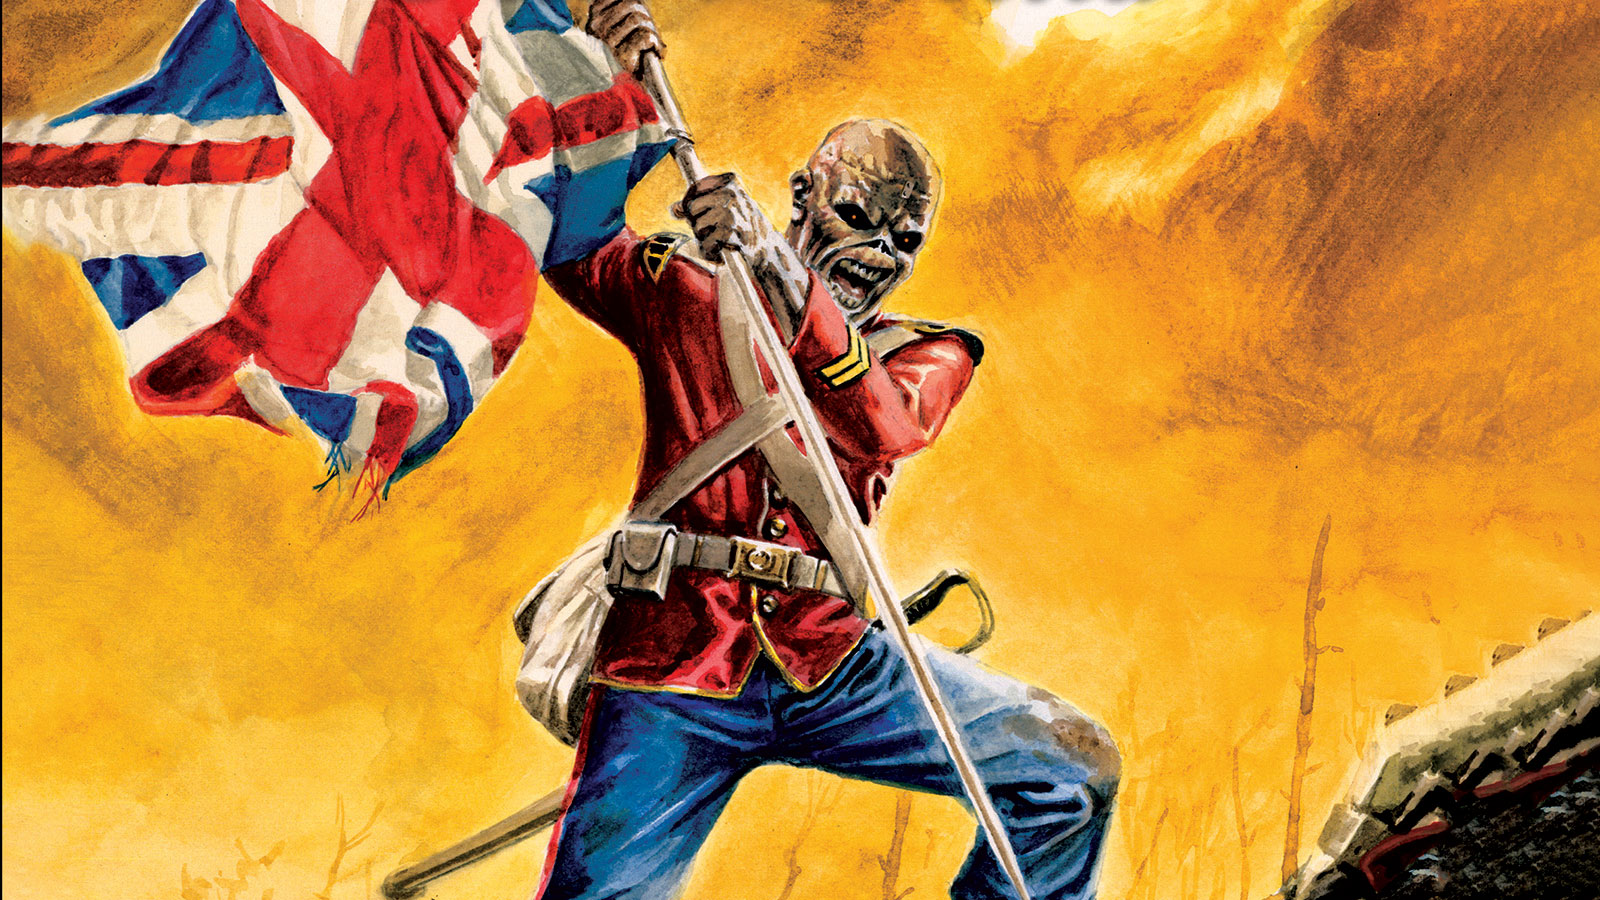 Iron Maiden - Epic 40th Anniversary 'Piece of Mind' Graphic Novel